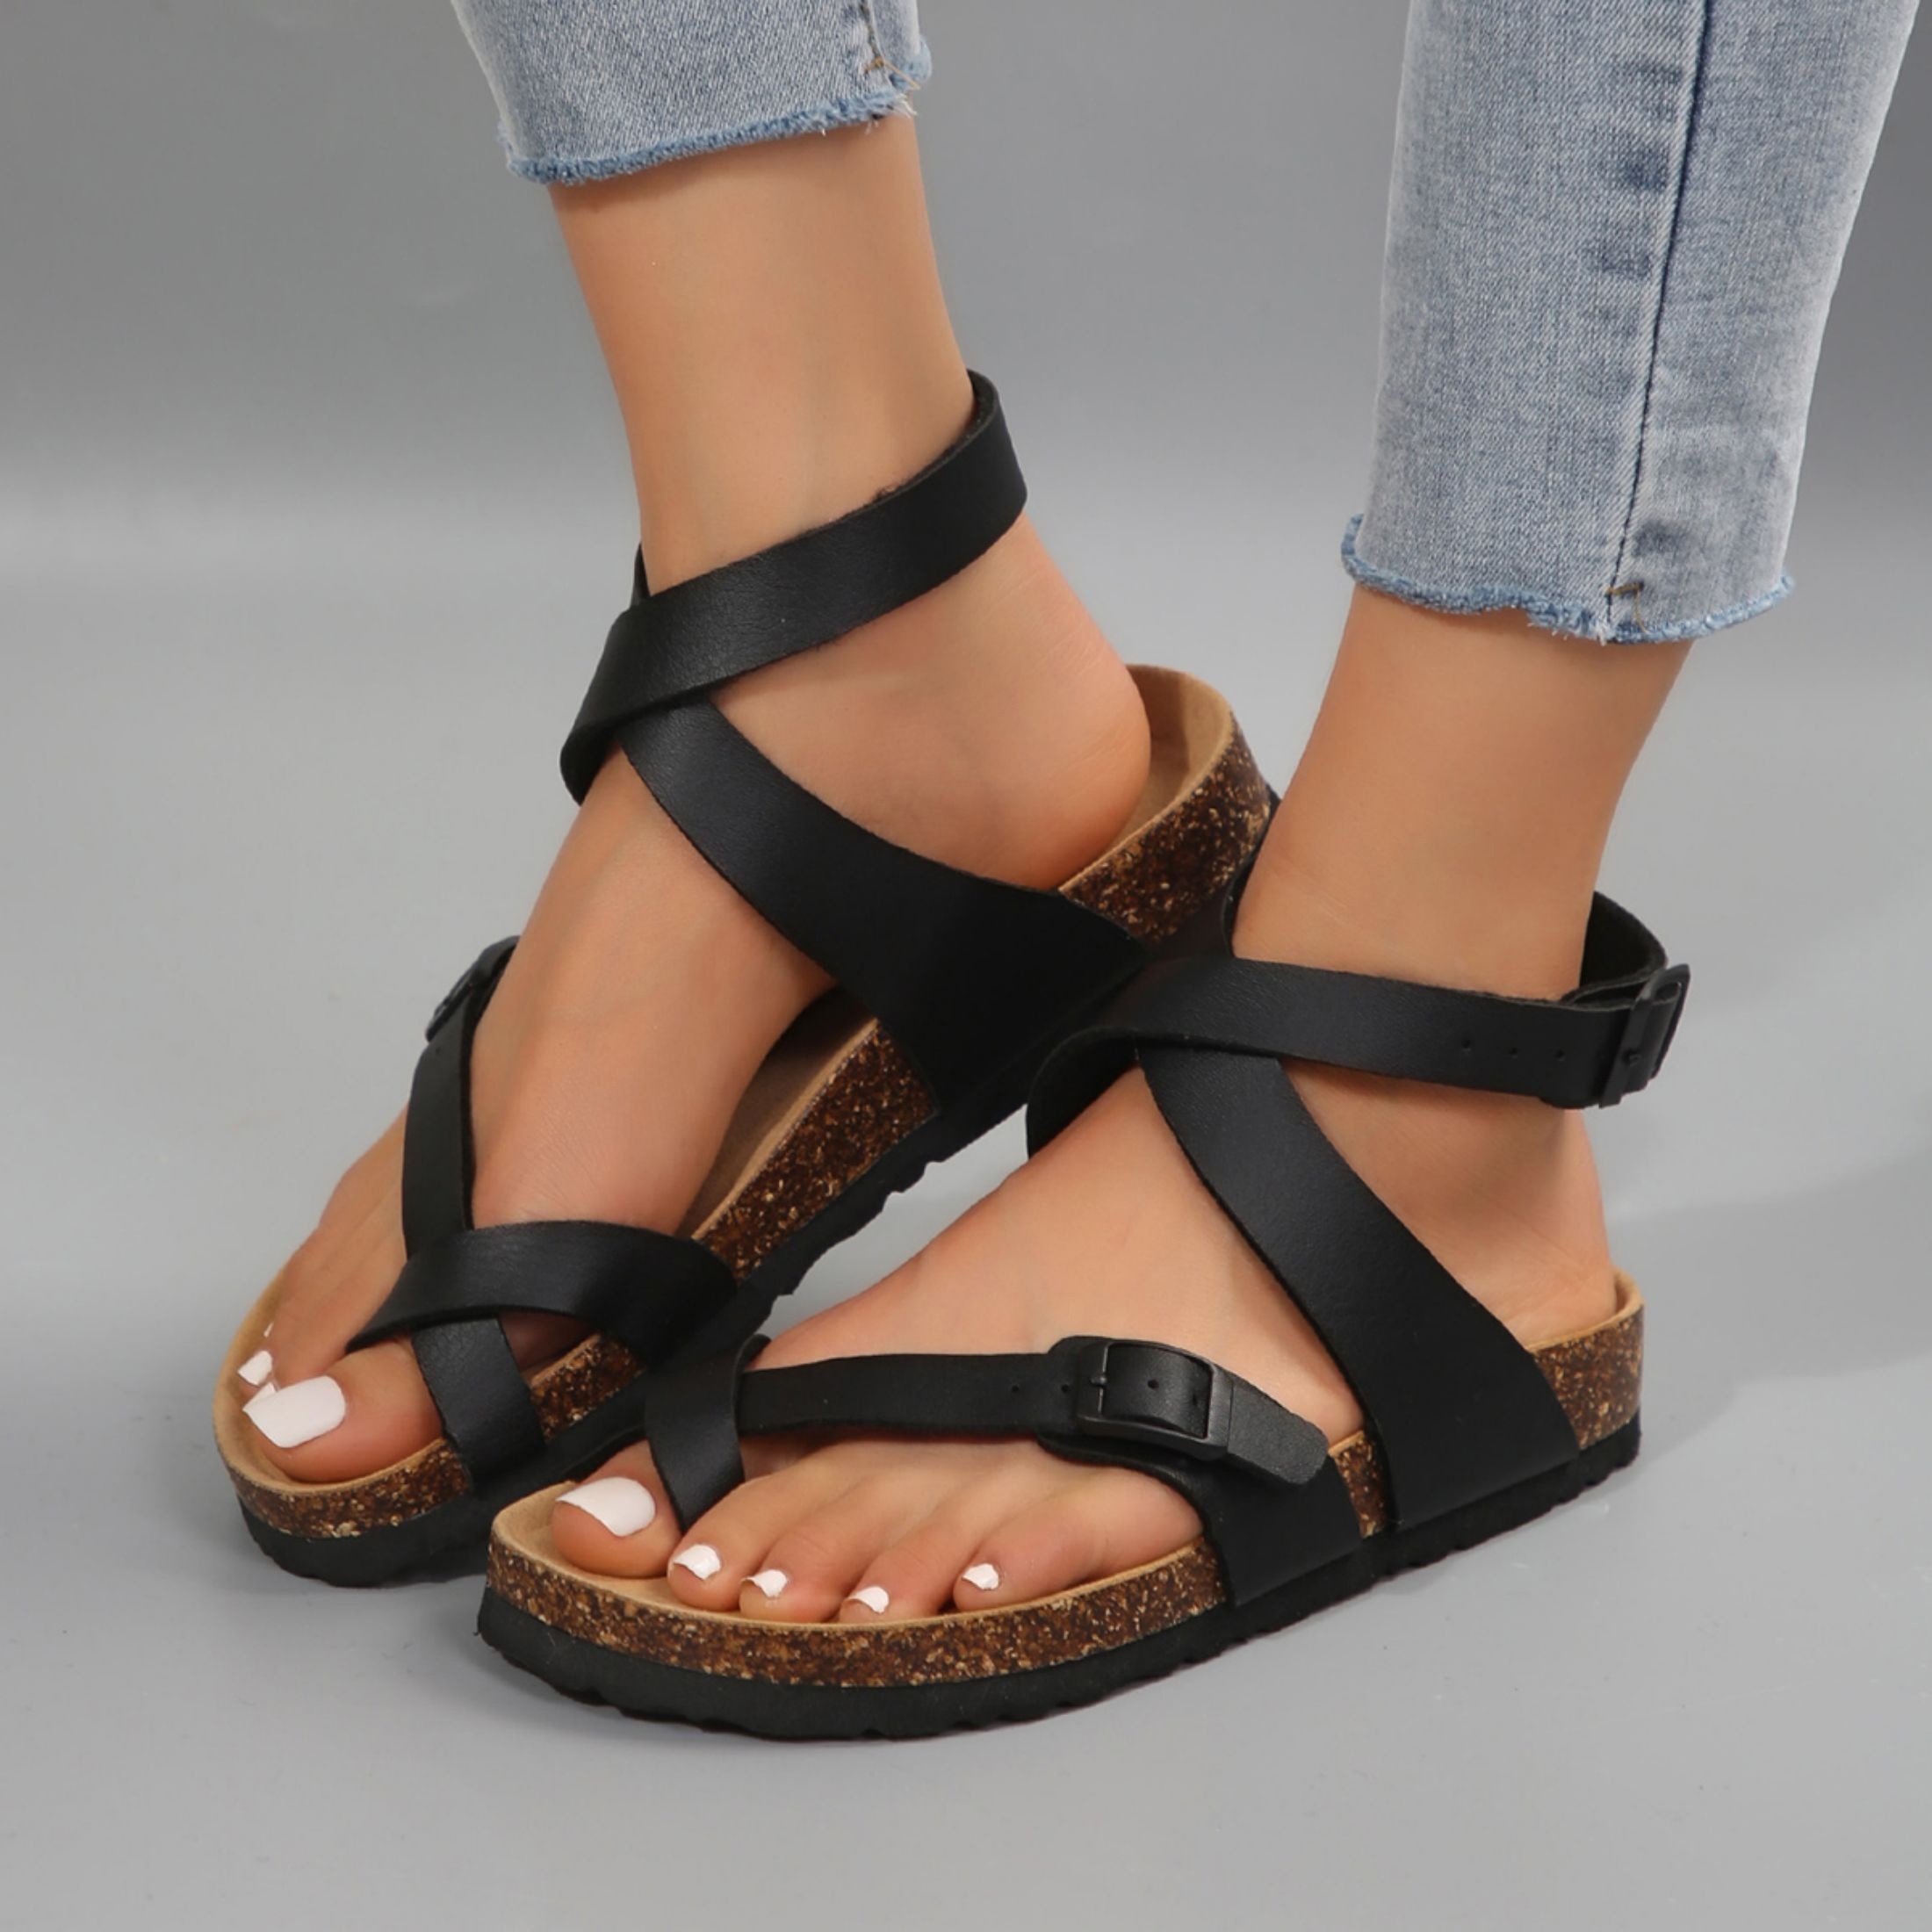 

Women's Casual Fashion Sandals With Adjustable Buckle Straps, Crisscross Buckle Soft Sole Non-slip Arch Support, Comfort Summer Holiday Footwear